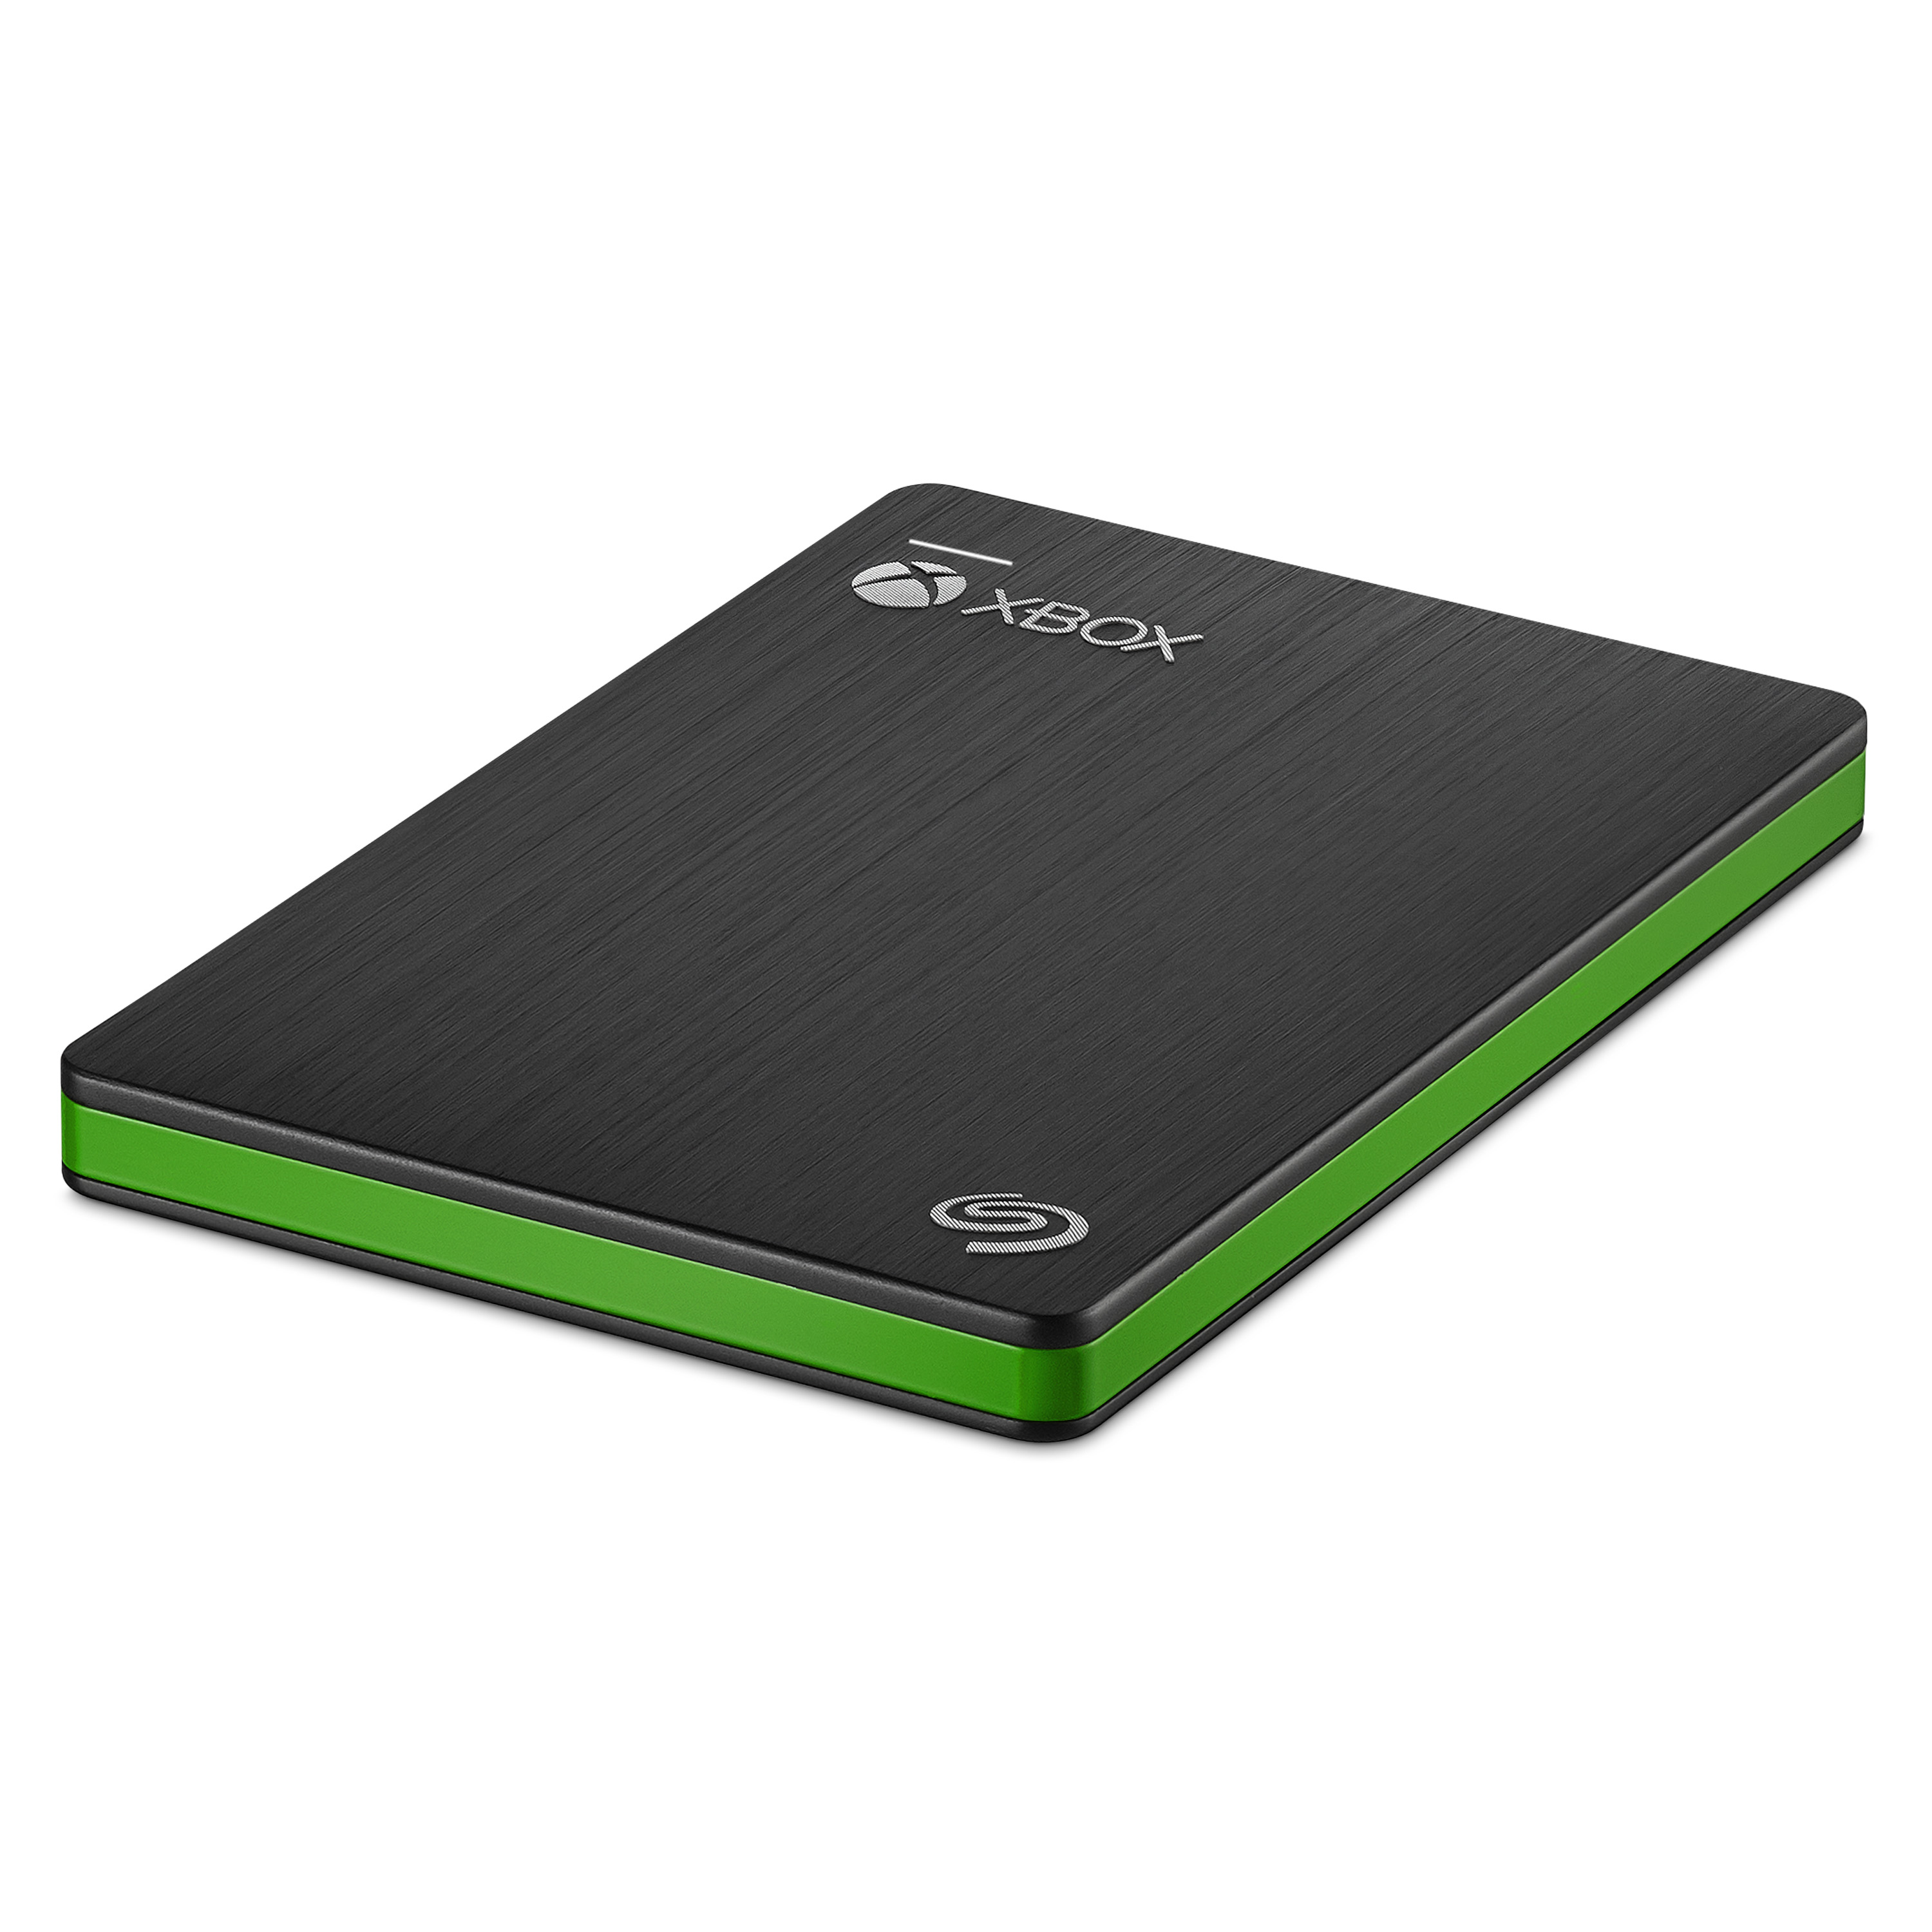 Seagate Enhances Gaming Experience With New Game Drive For Xbox SSD | News | Seagate US